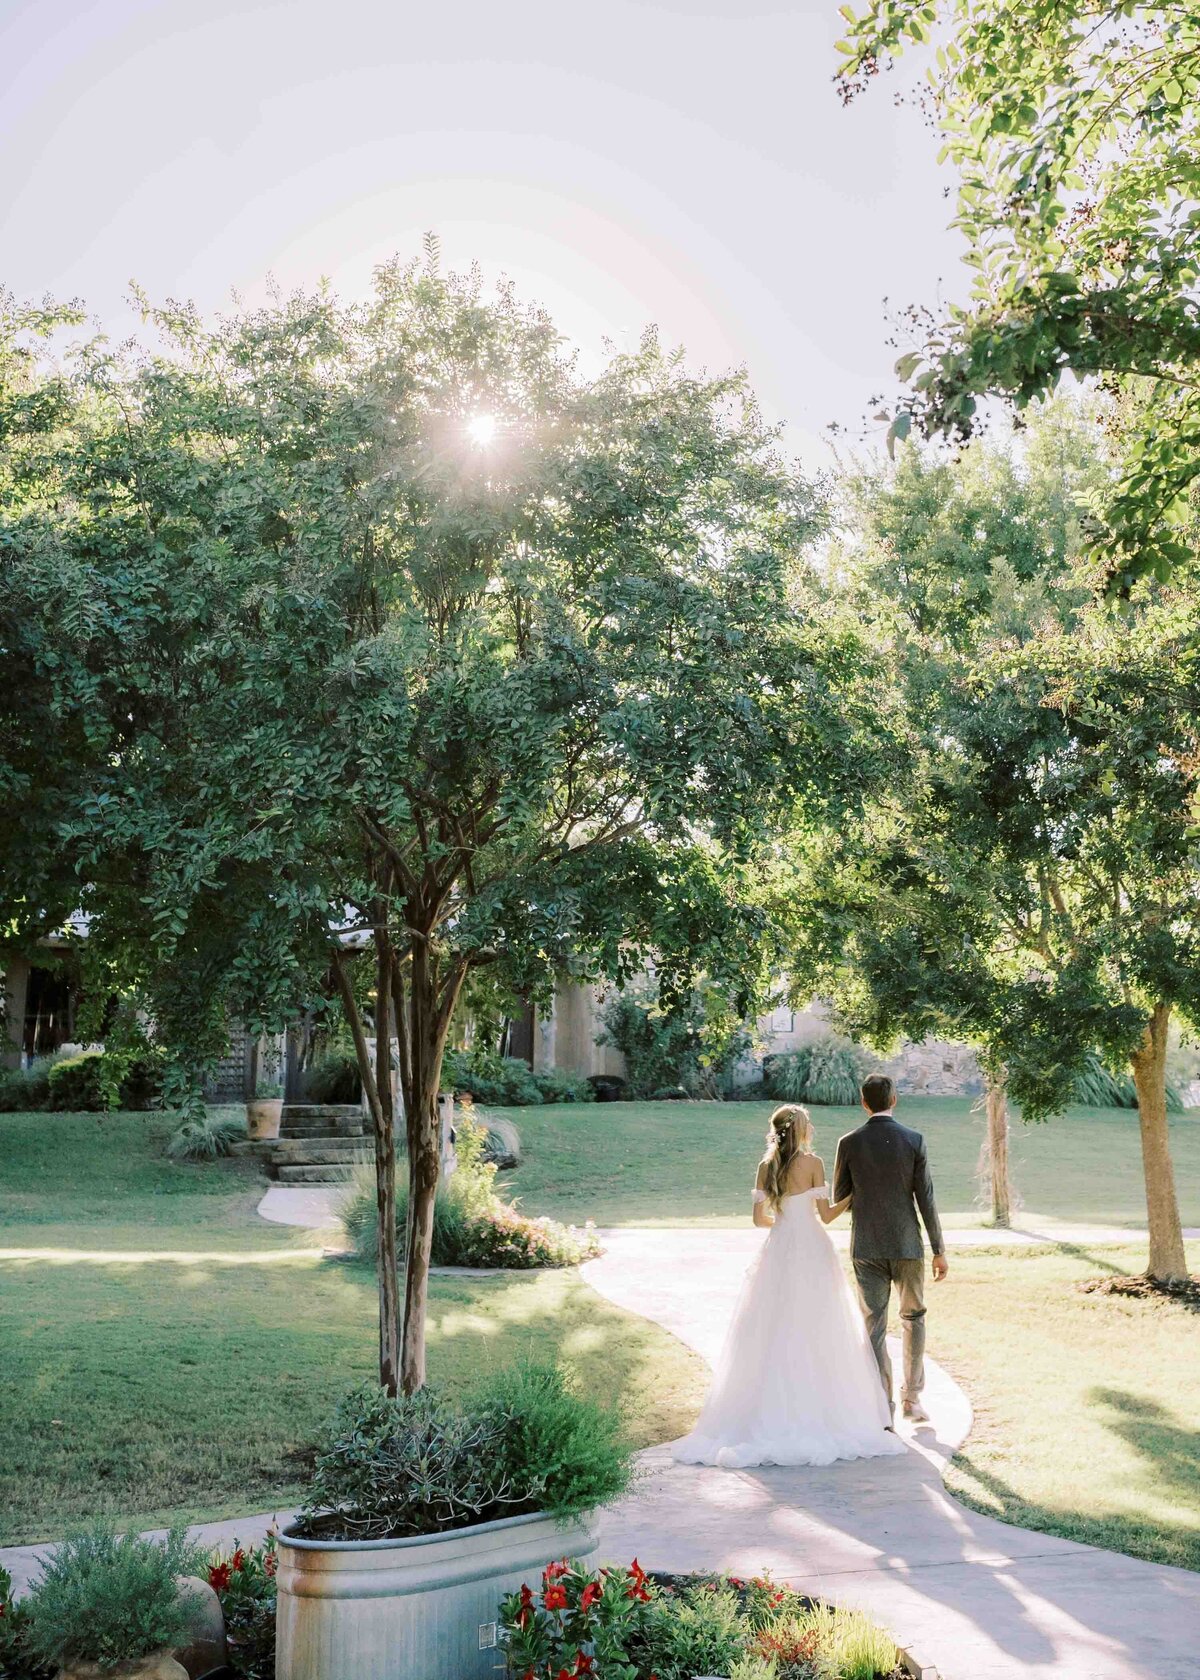 NYC AND DFW WEDDING AND ENGAGEMENT PHOTOS